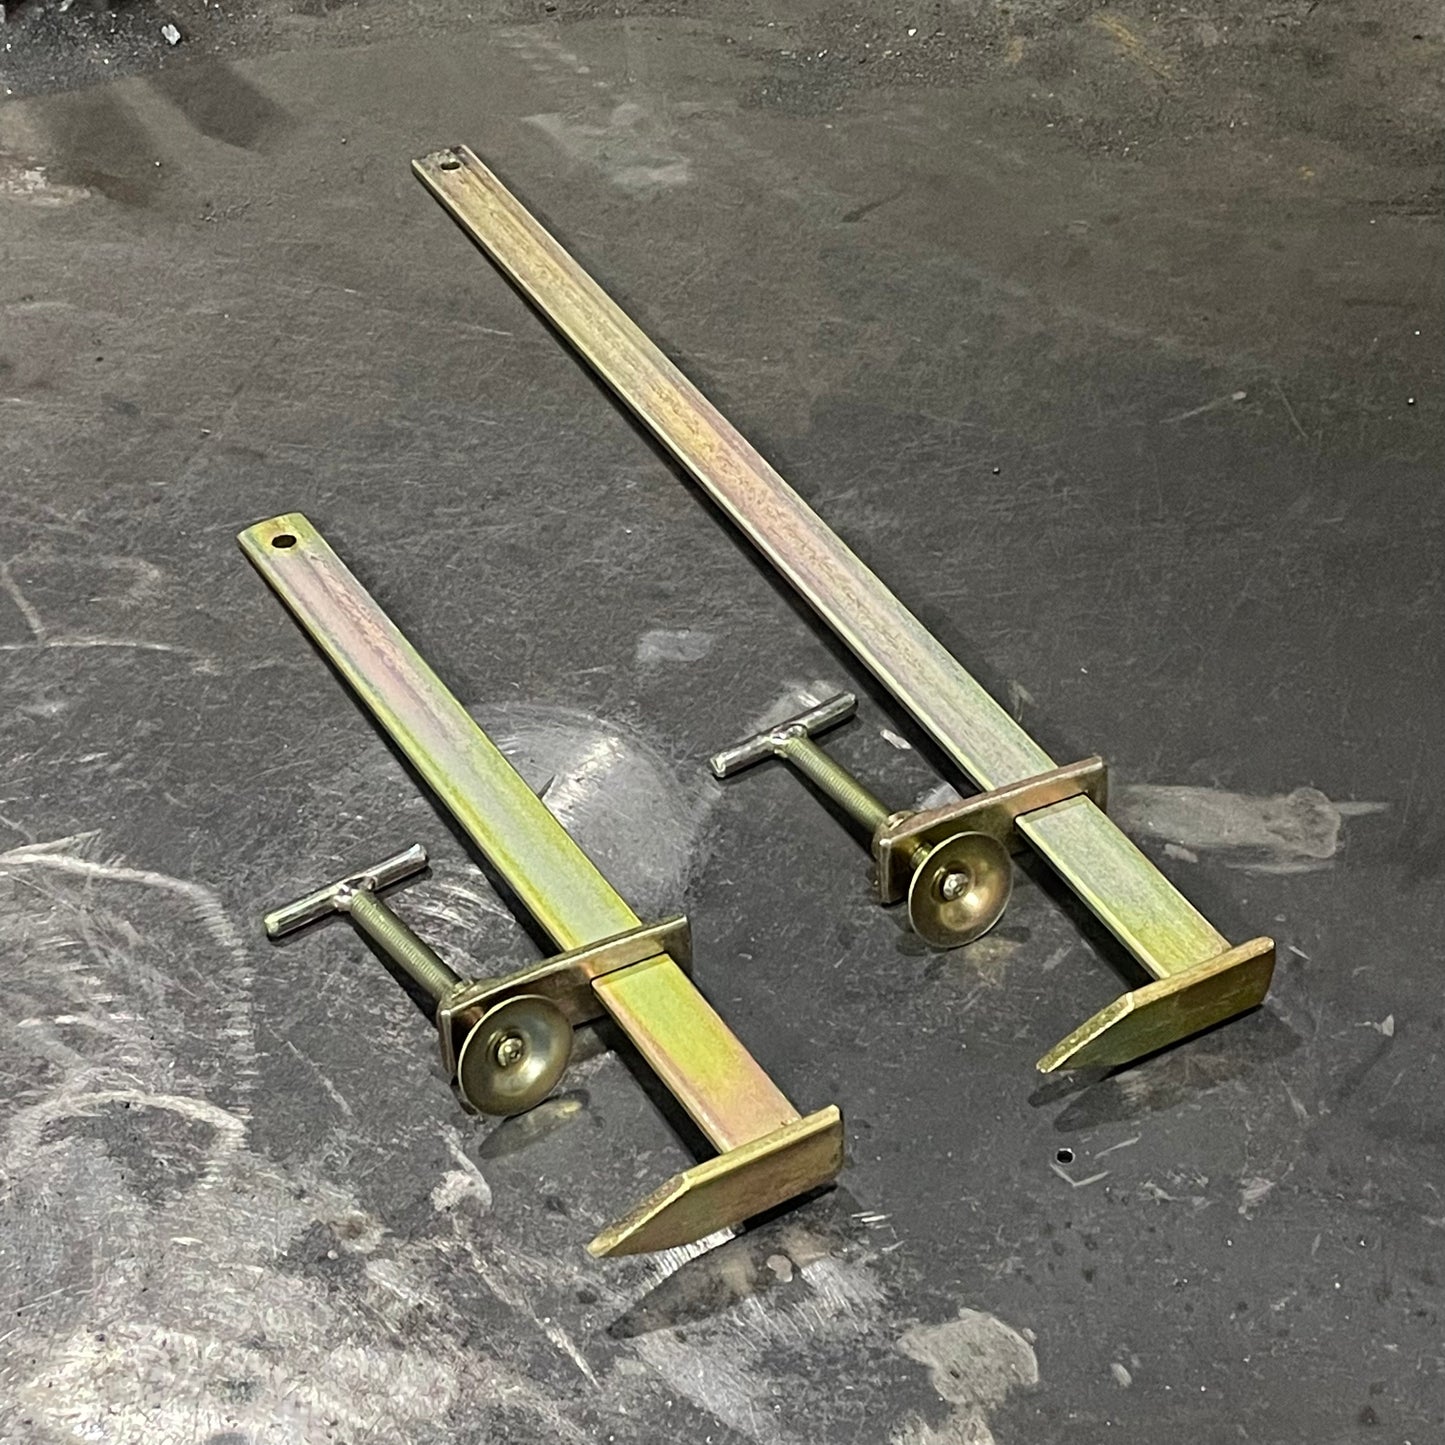 External Clamp - Spiked Sliding Clamp